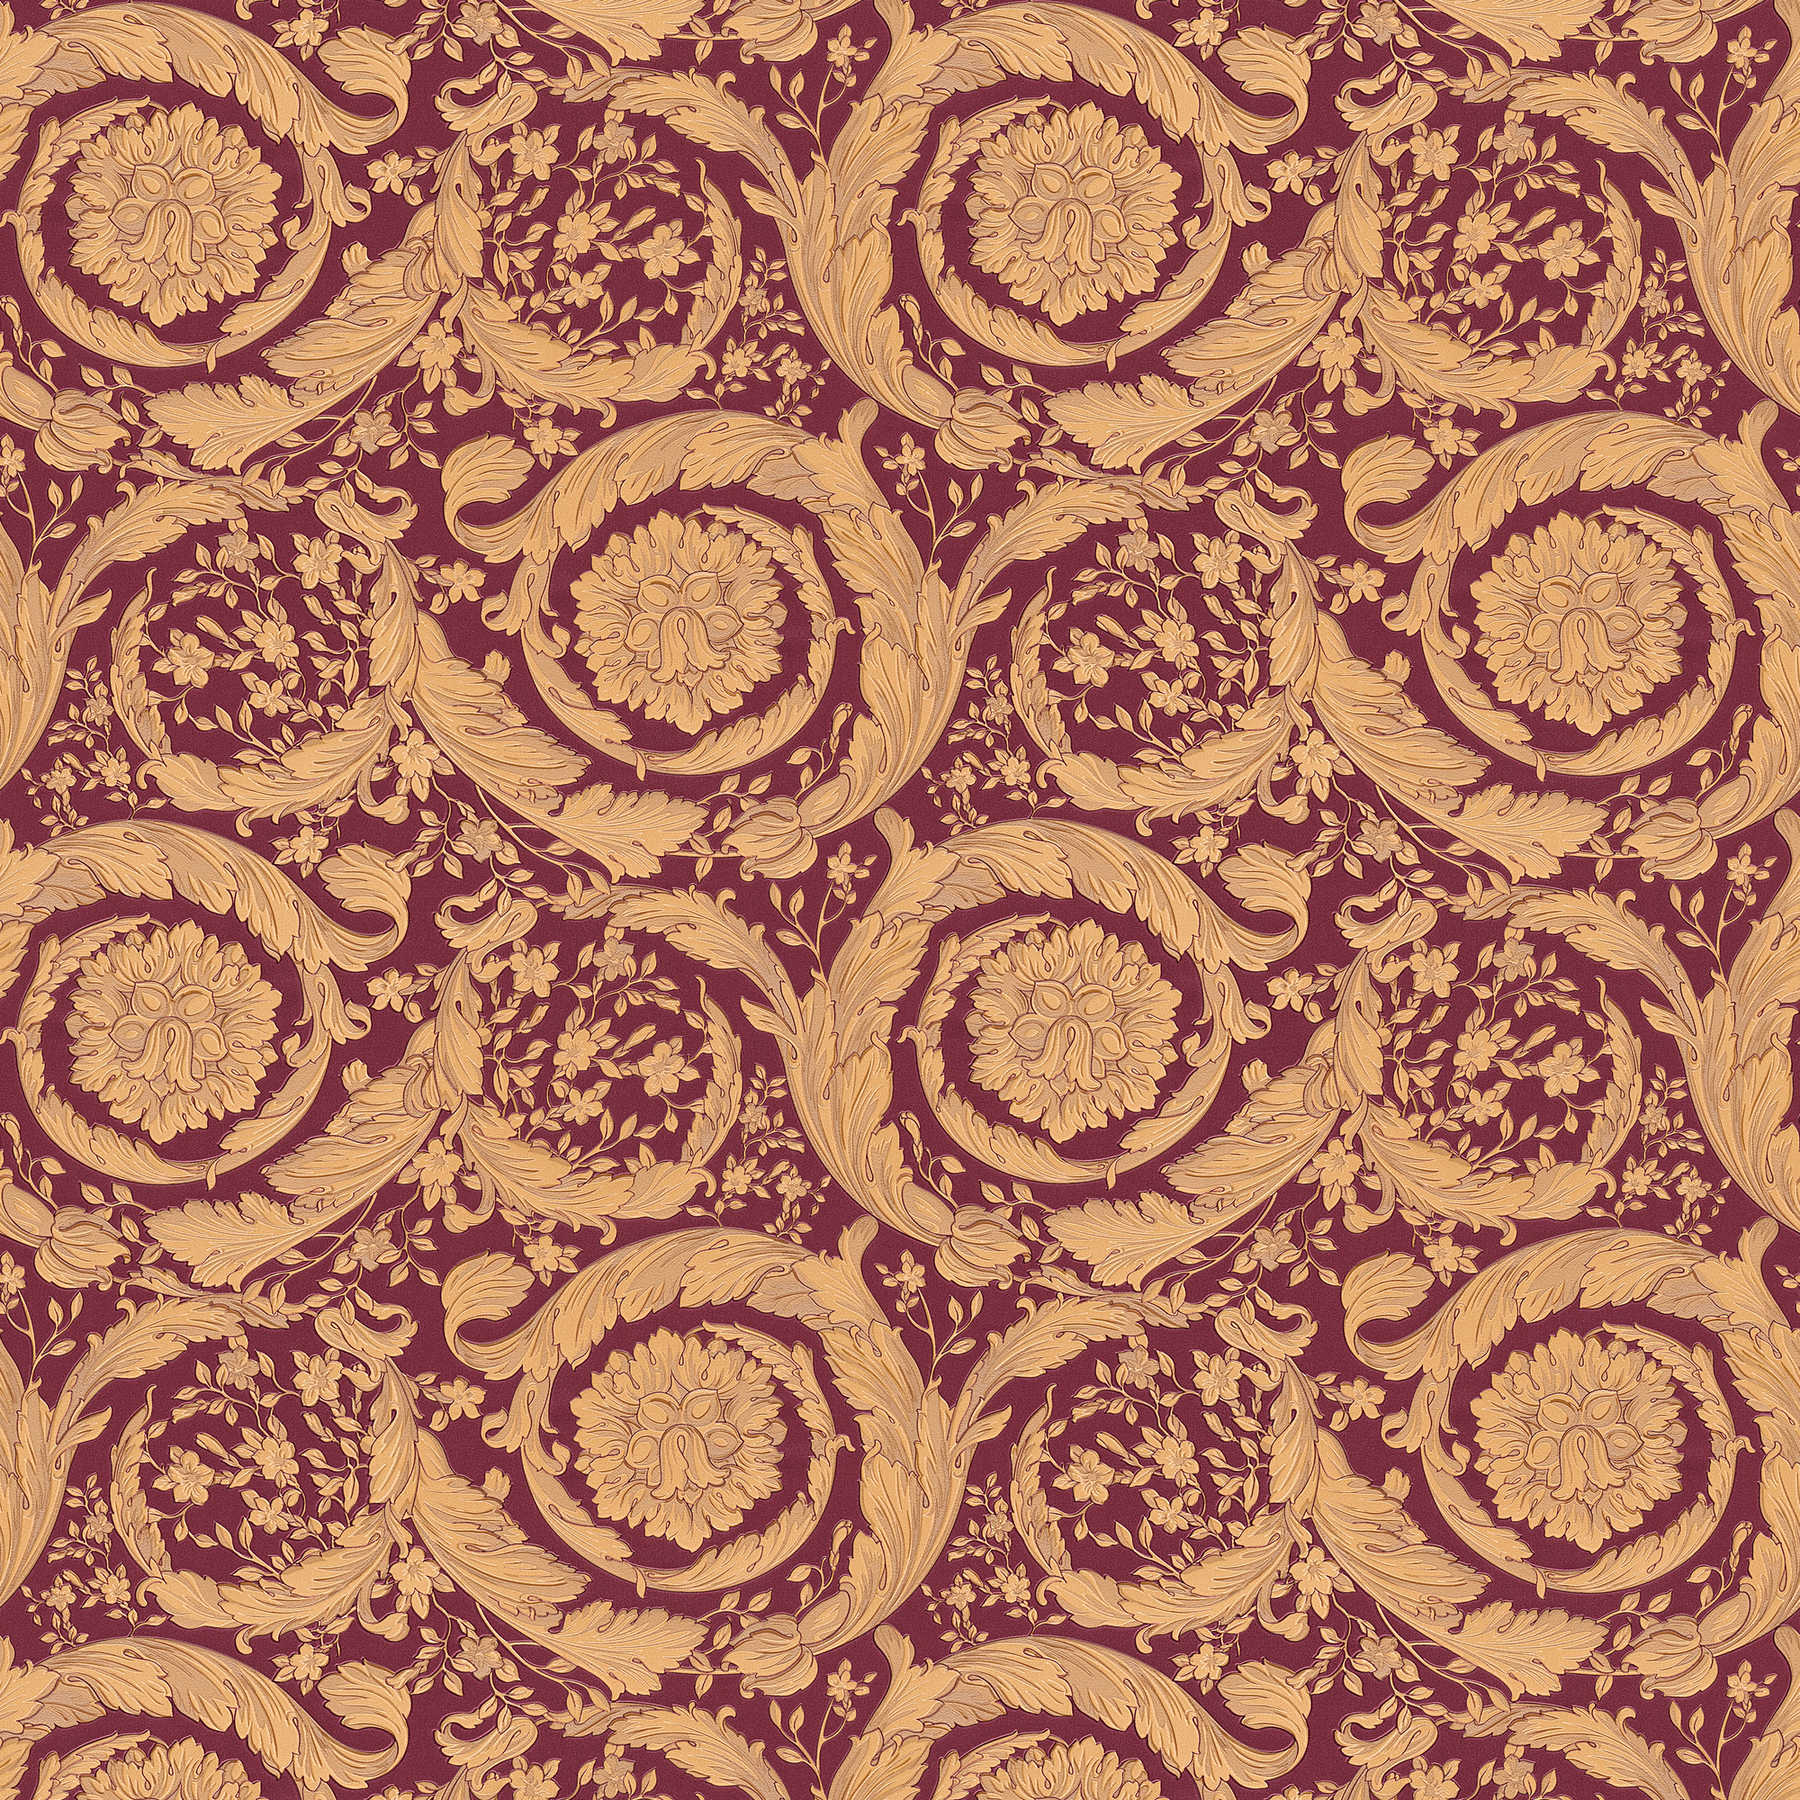 VERSACE wallpaper ornamental floral pattern - red, gold, brown
